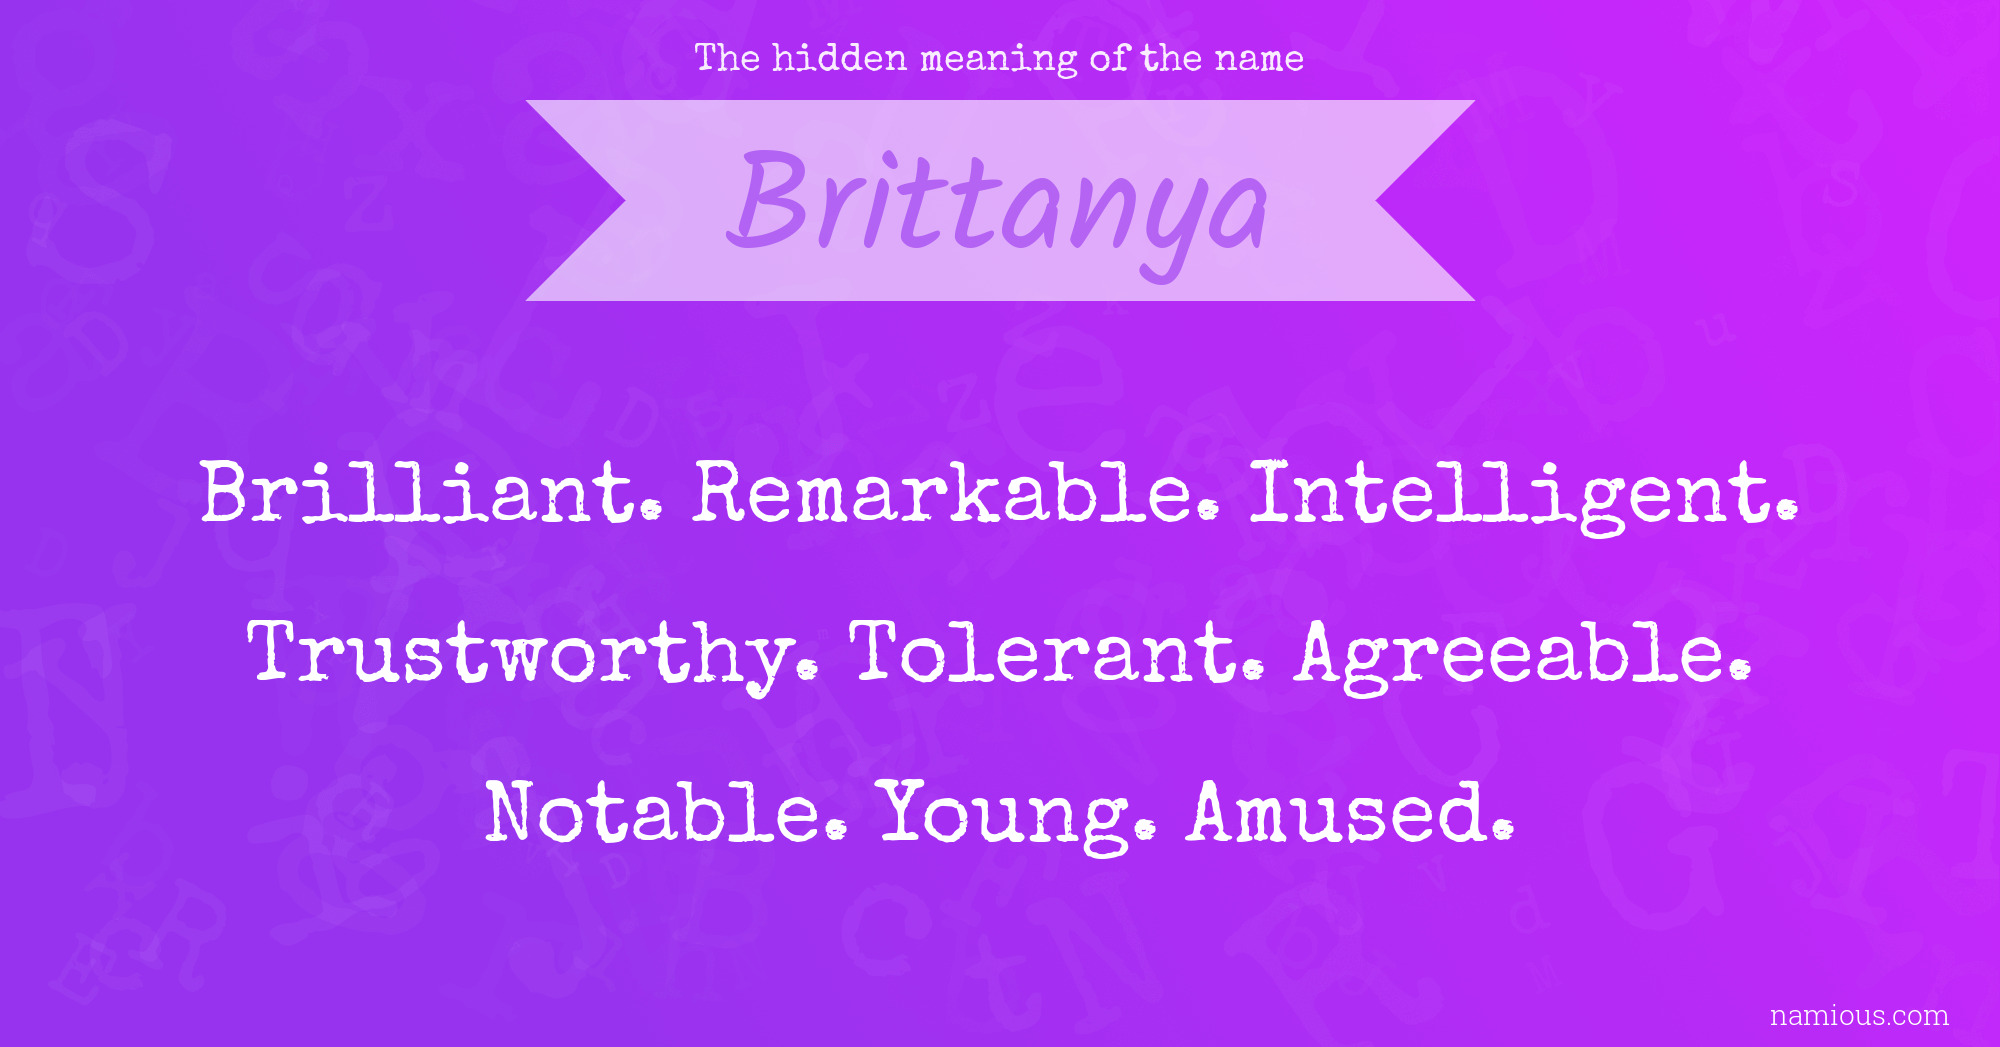 The hidden meaning of the name Brittanya